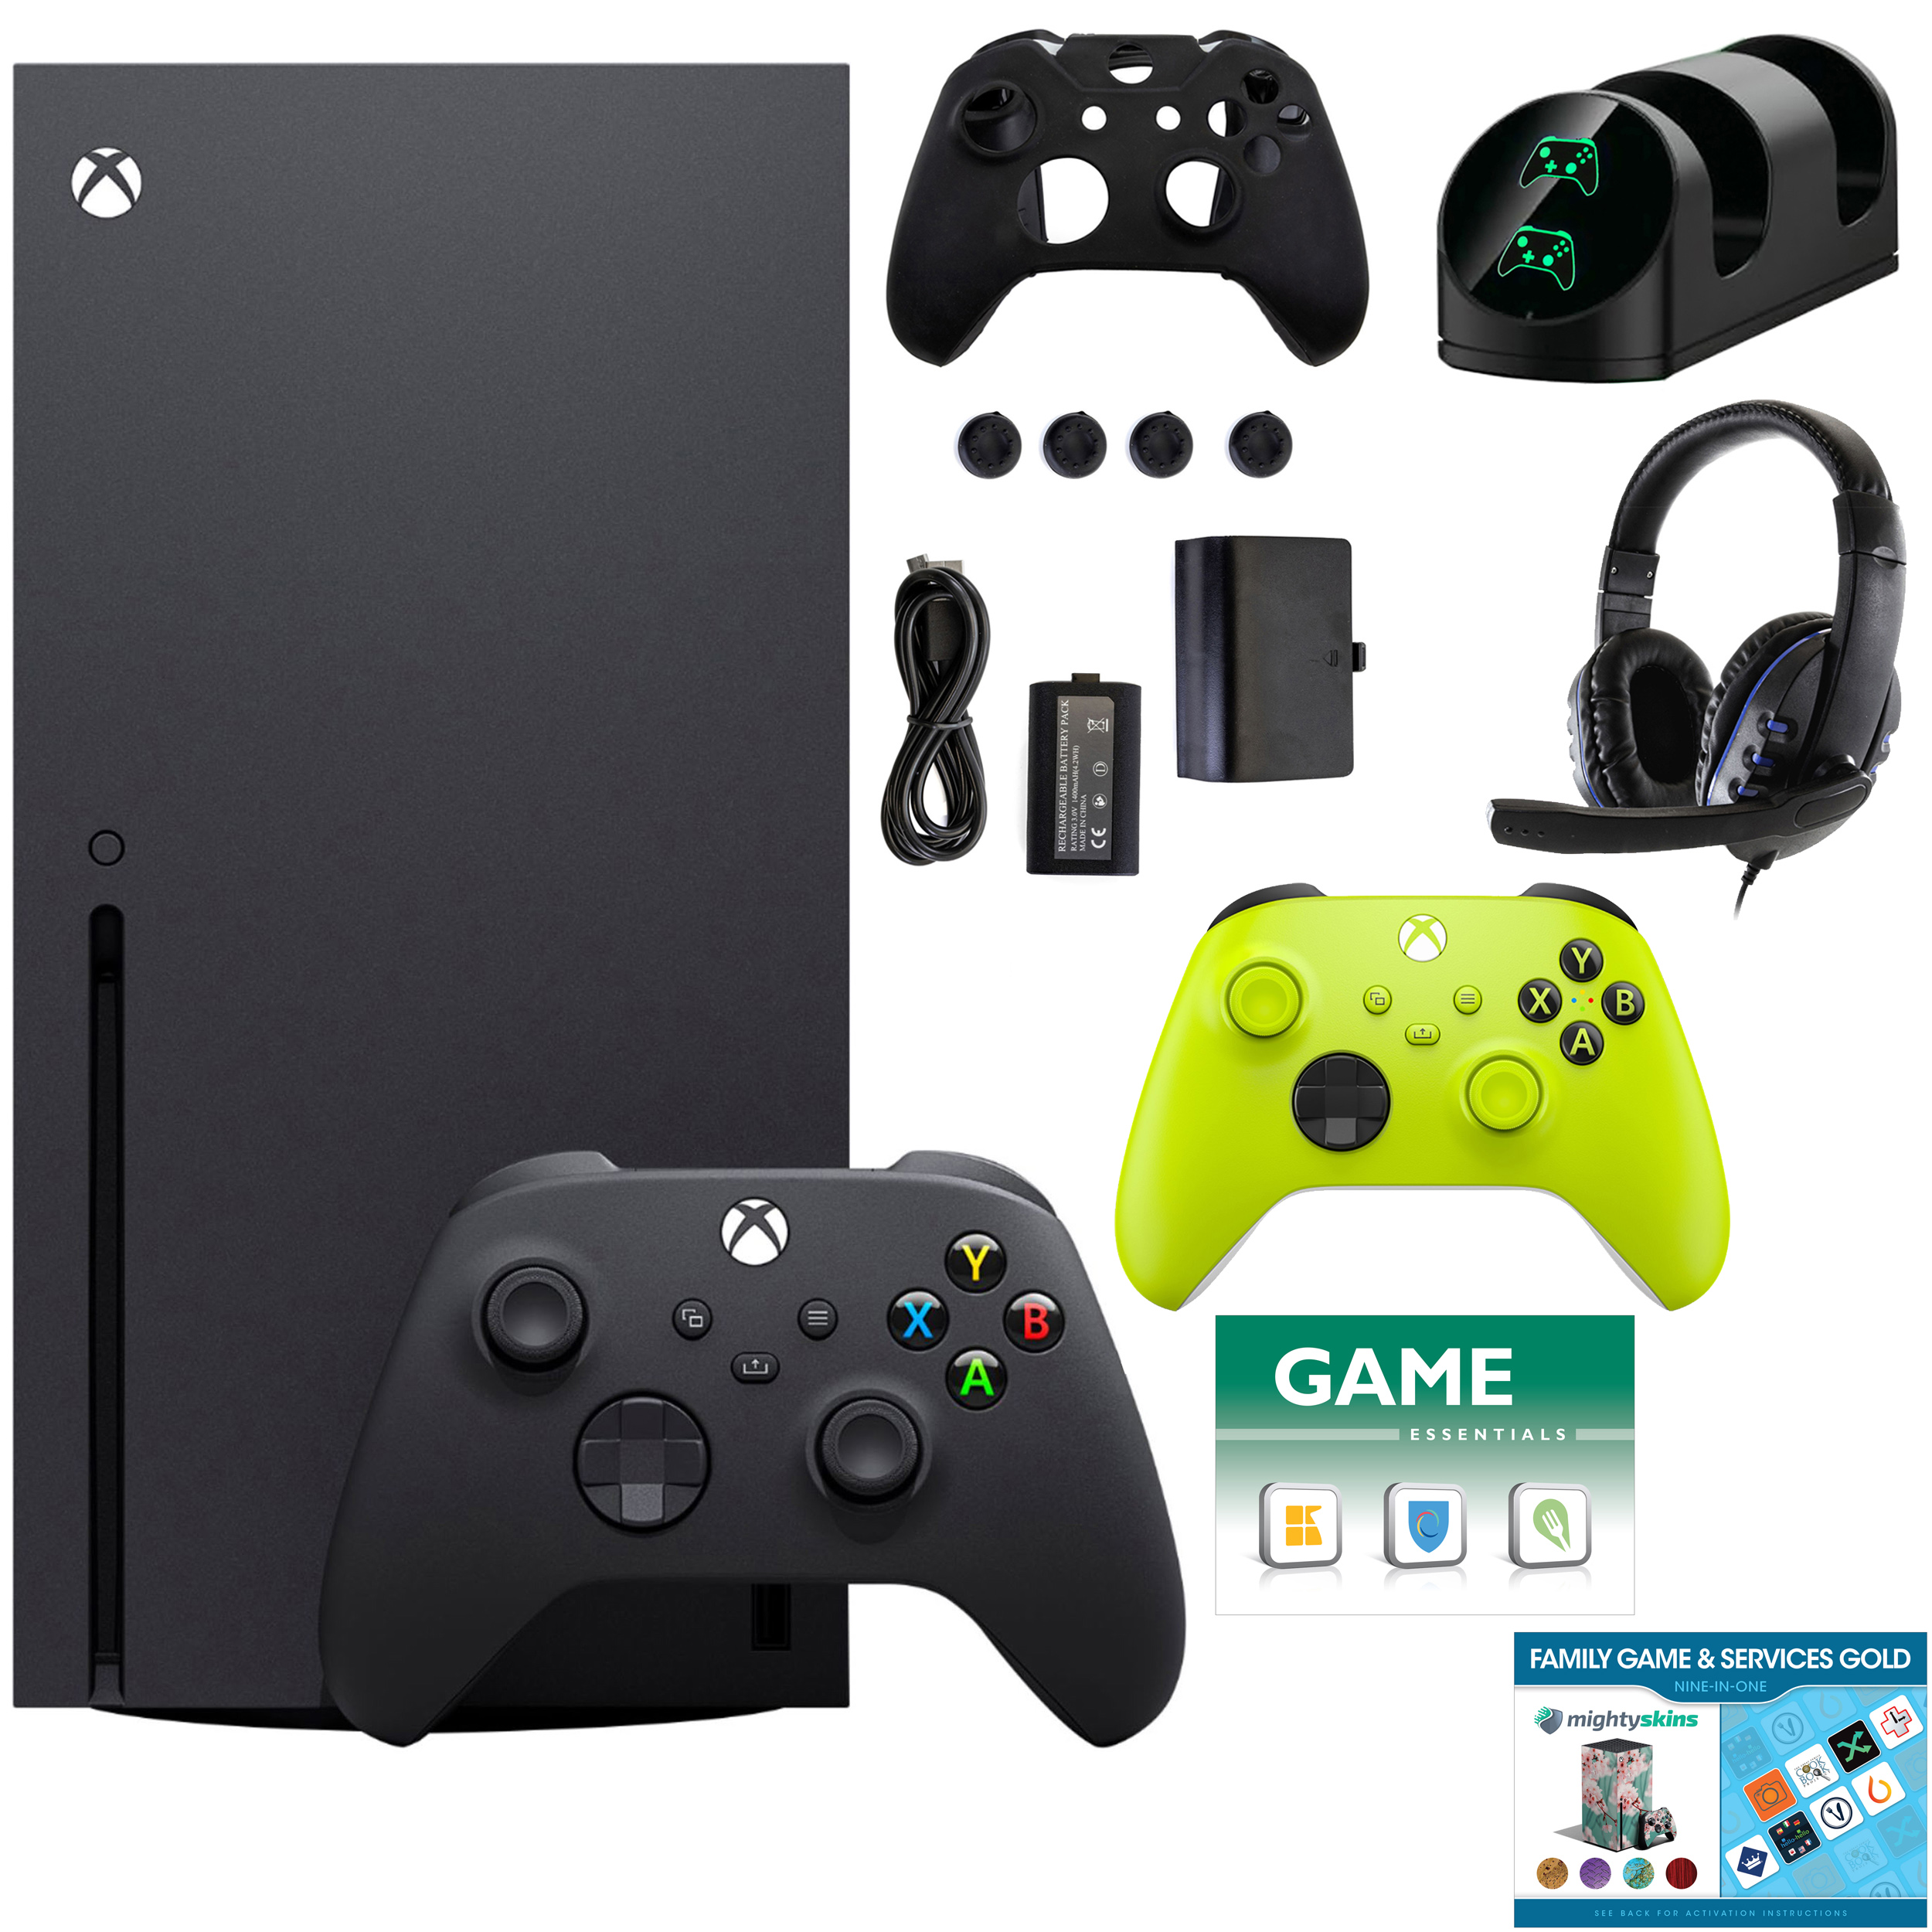 Microsoft Xbox Series X 1TB Console with Extra Volt Controller Accessories Kit and 2 Vouchers